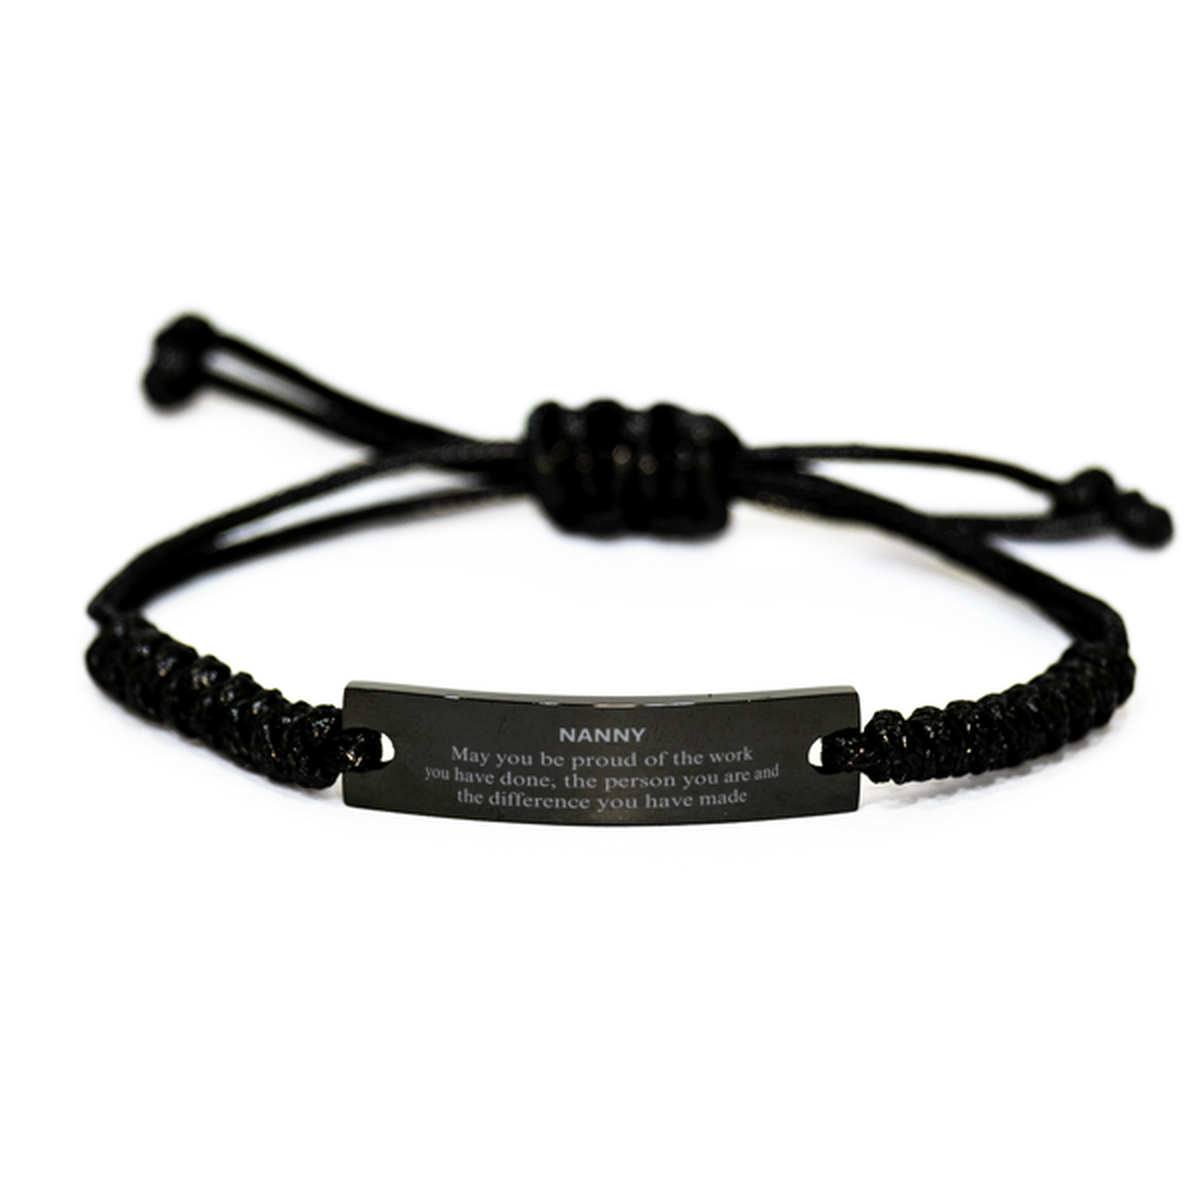 Nanny May you be proud of the work you have done, Retirement Nanny Black Rope Bracelet for Colleague Appreciation Gifts Amazing for Nanny